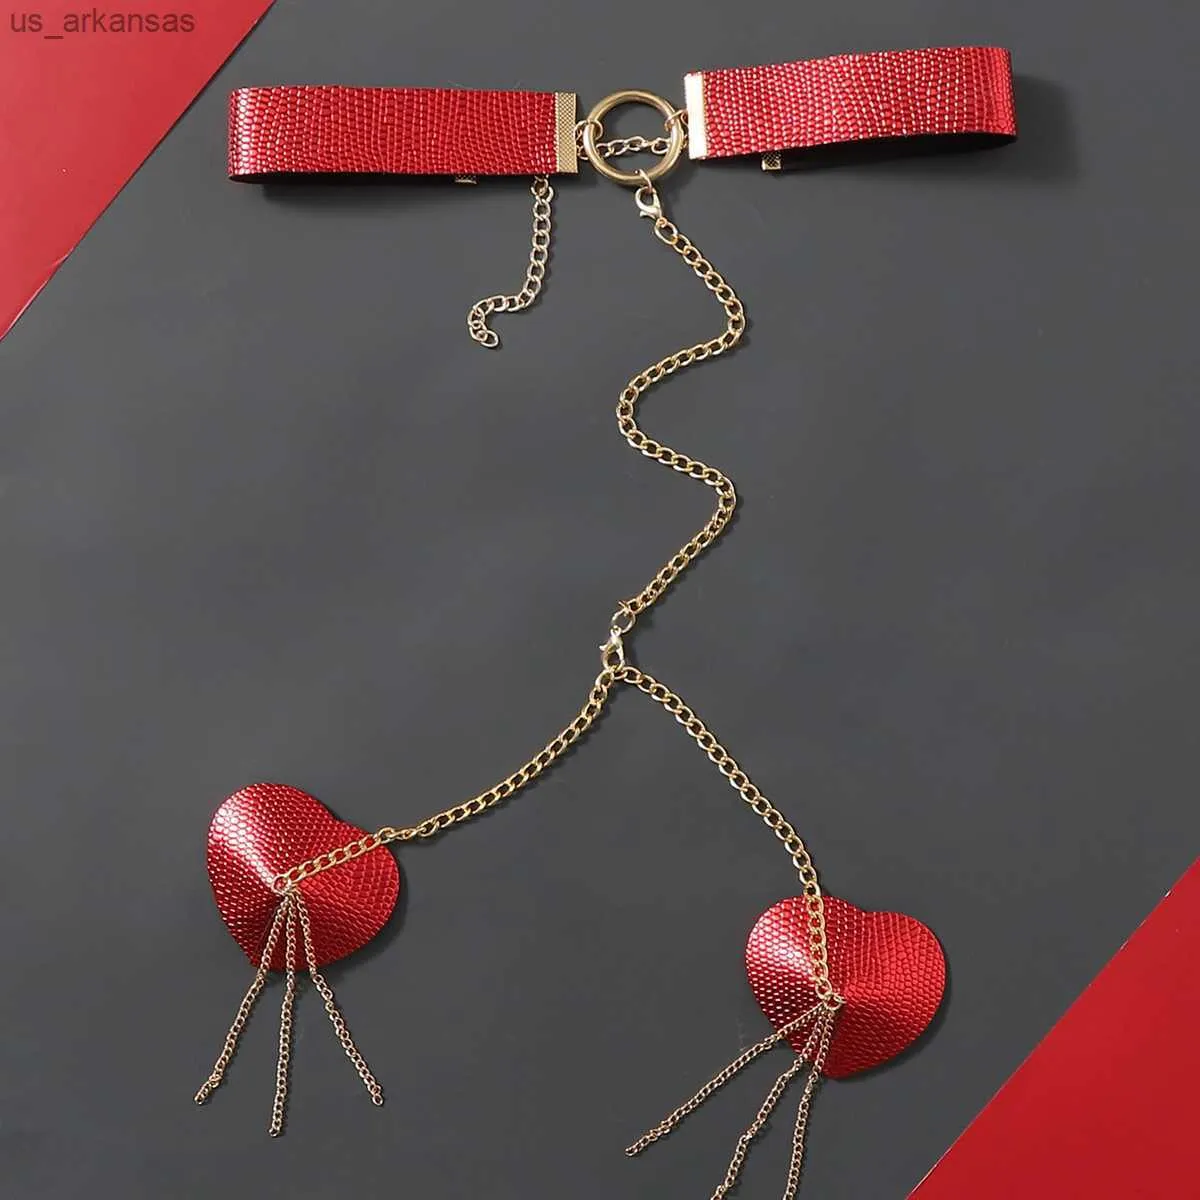 Sexy New Women Red Heart Tassel Nipple Cover Reusable Metal Chain Linked  With Choker Breast Pasties Body Jewelry Chain L230523 From Us_arkansas,  $3.95